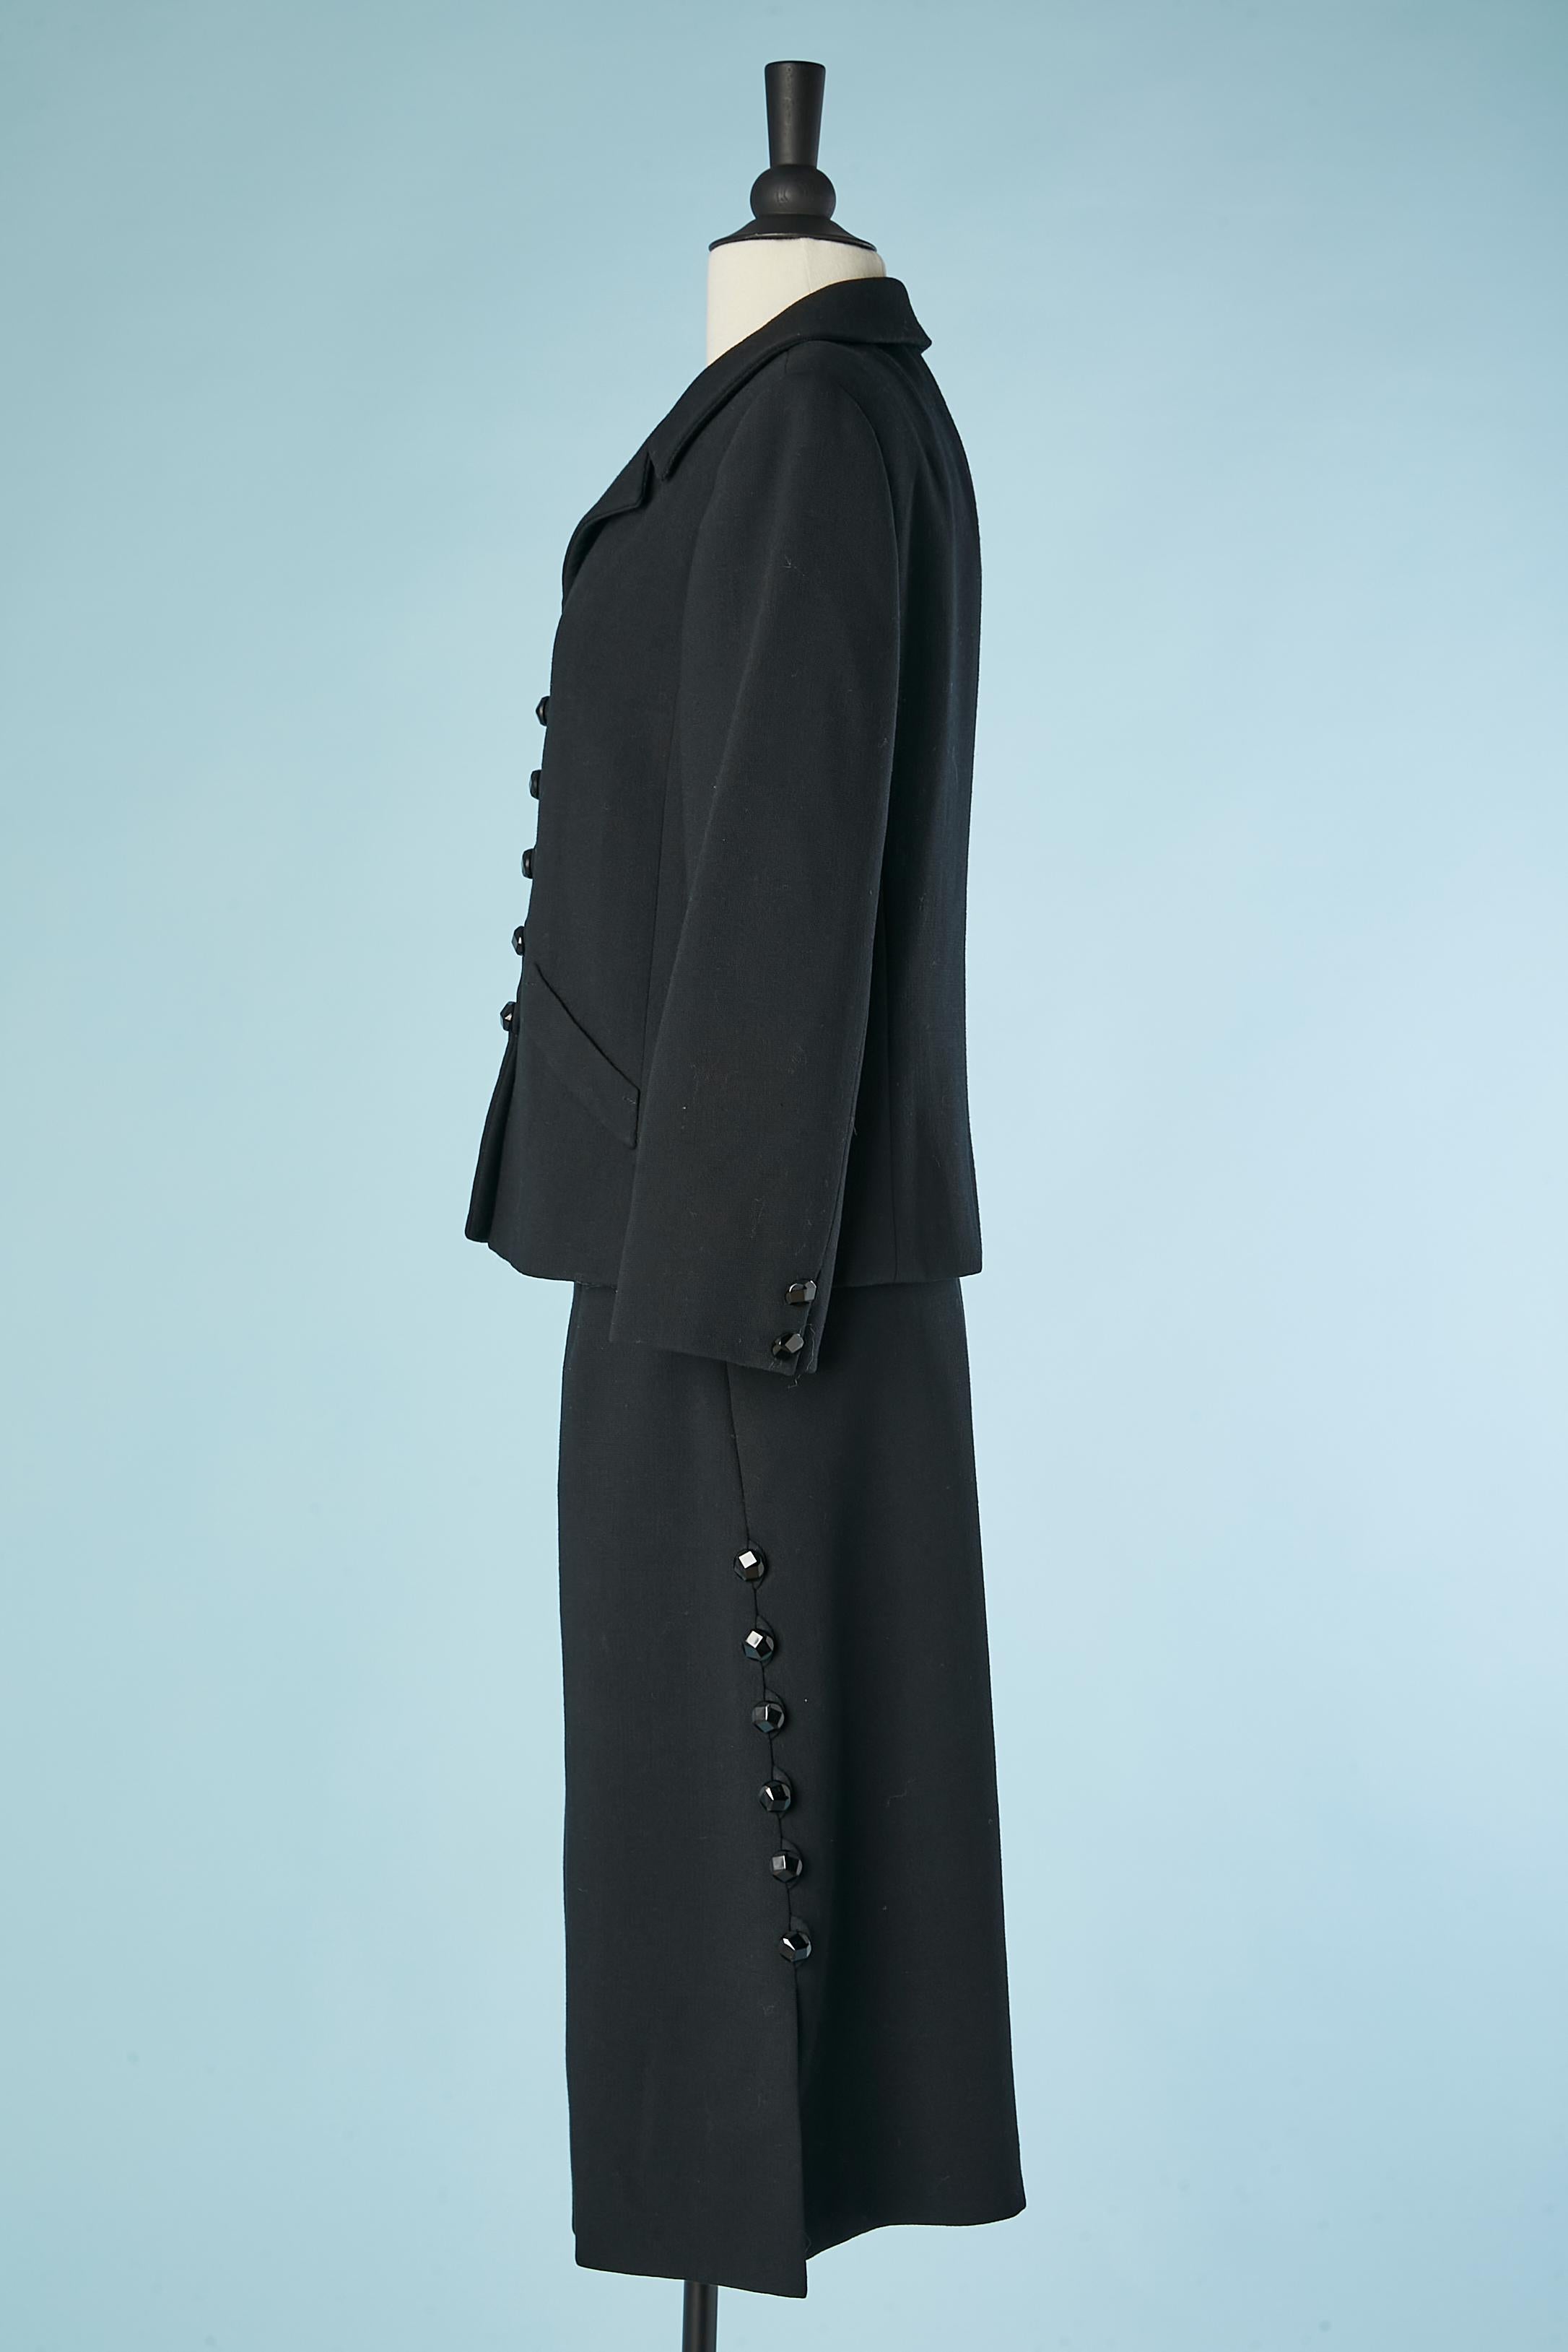 Women's Black wool crêpe skit-suit with black buttons Christian Dior New-York Circa 1950 For Sale